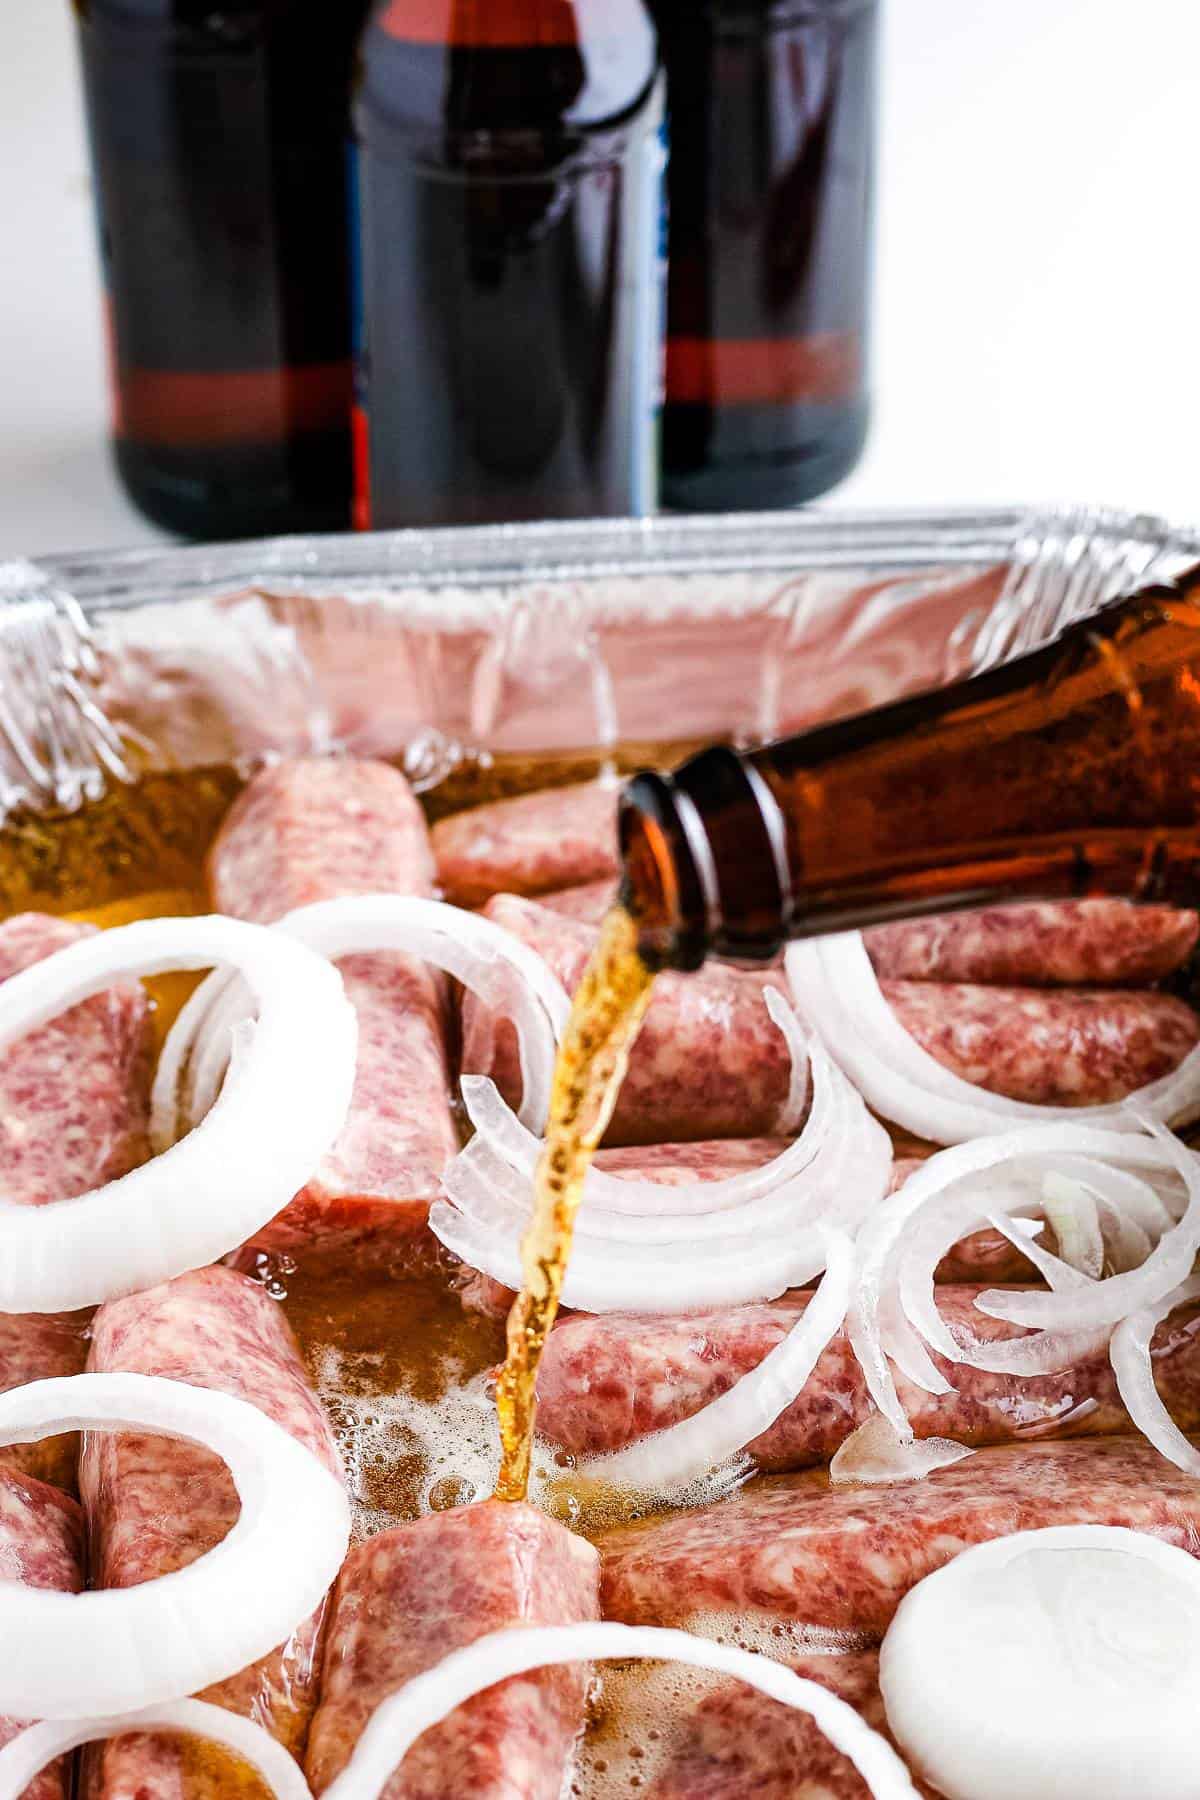 Amber colored bottle of beer being poured into disposable pan with sliced onions and brats.